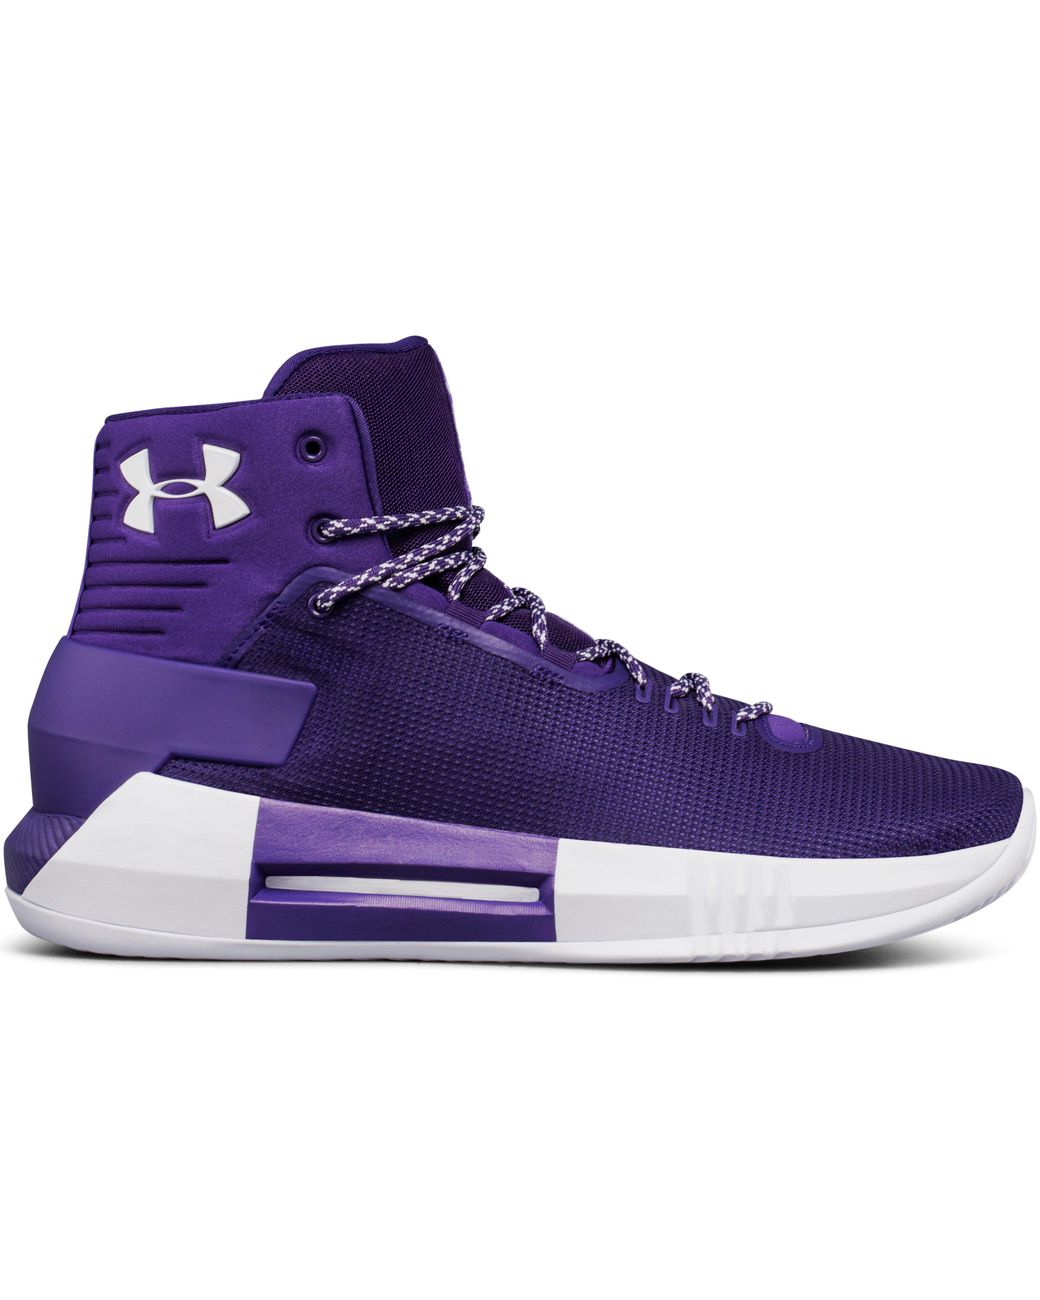 Under Armour Men's Ua Team Drive 4 Basketball Shoes in Purple for Men ...